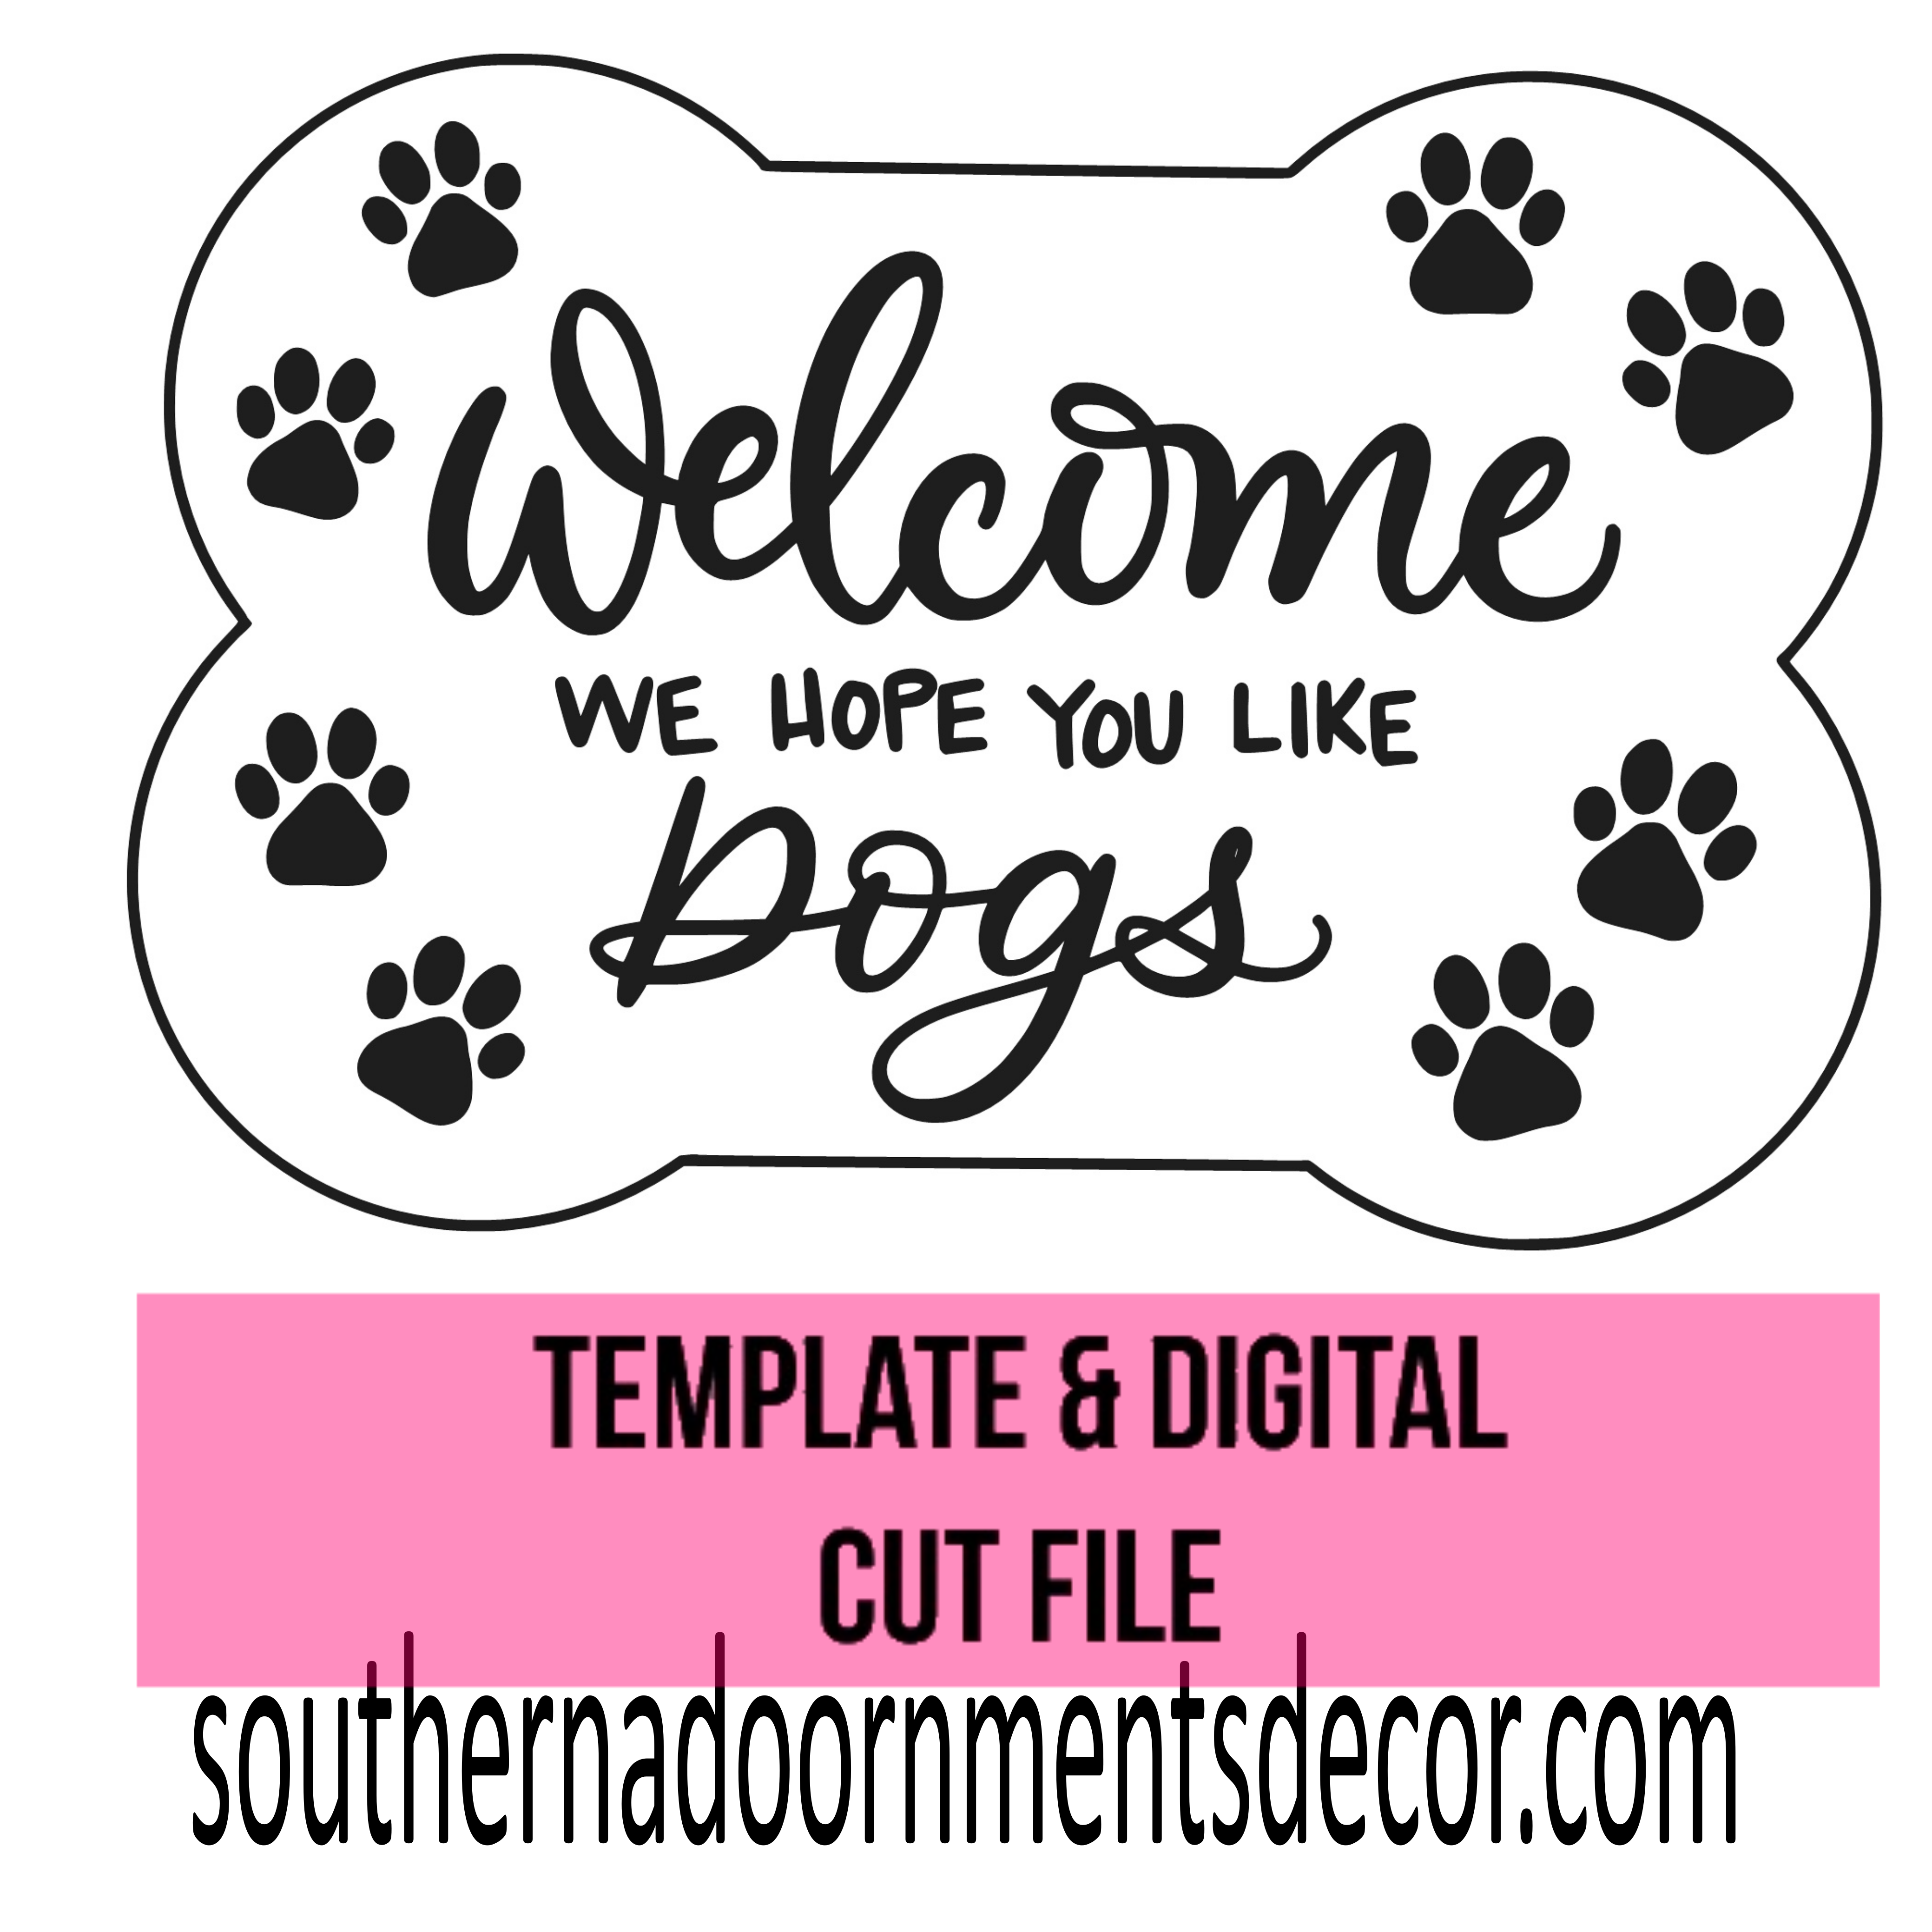 Welcome Dogs Template & Digital Cut File